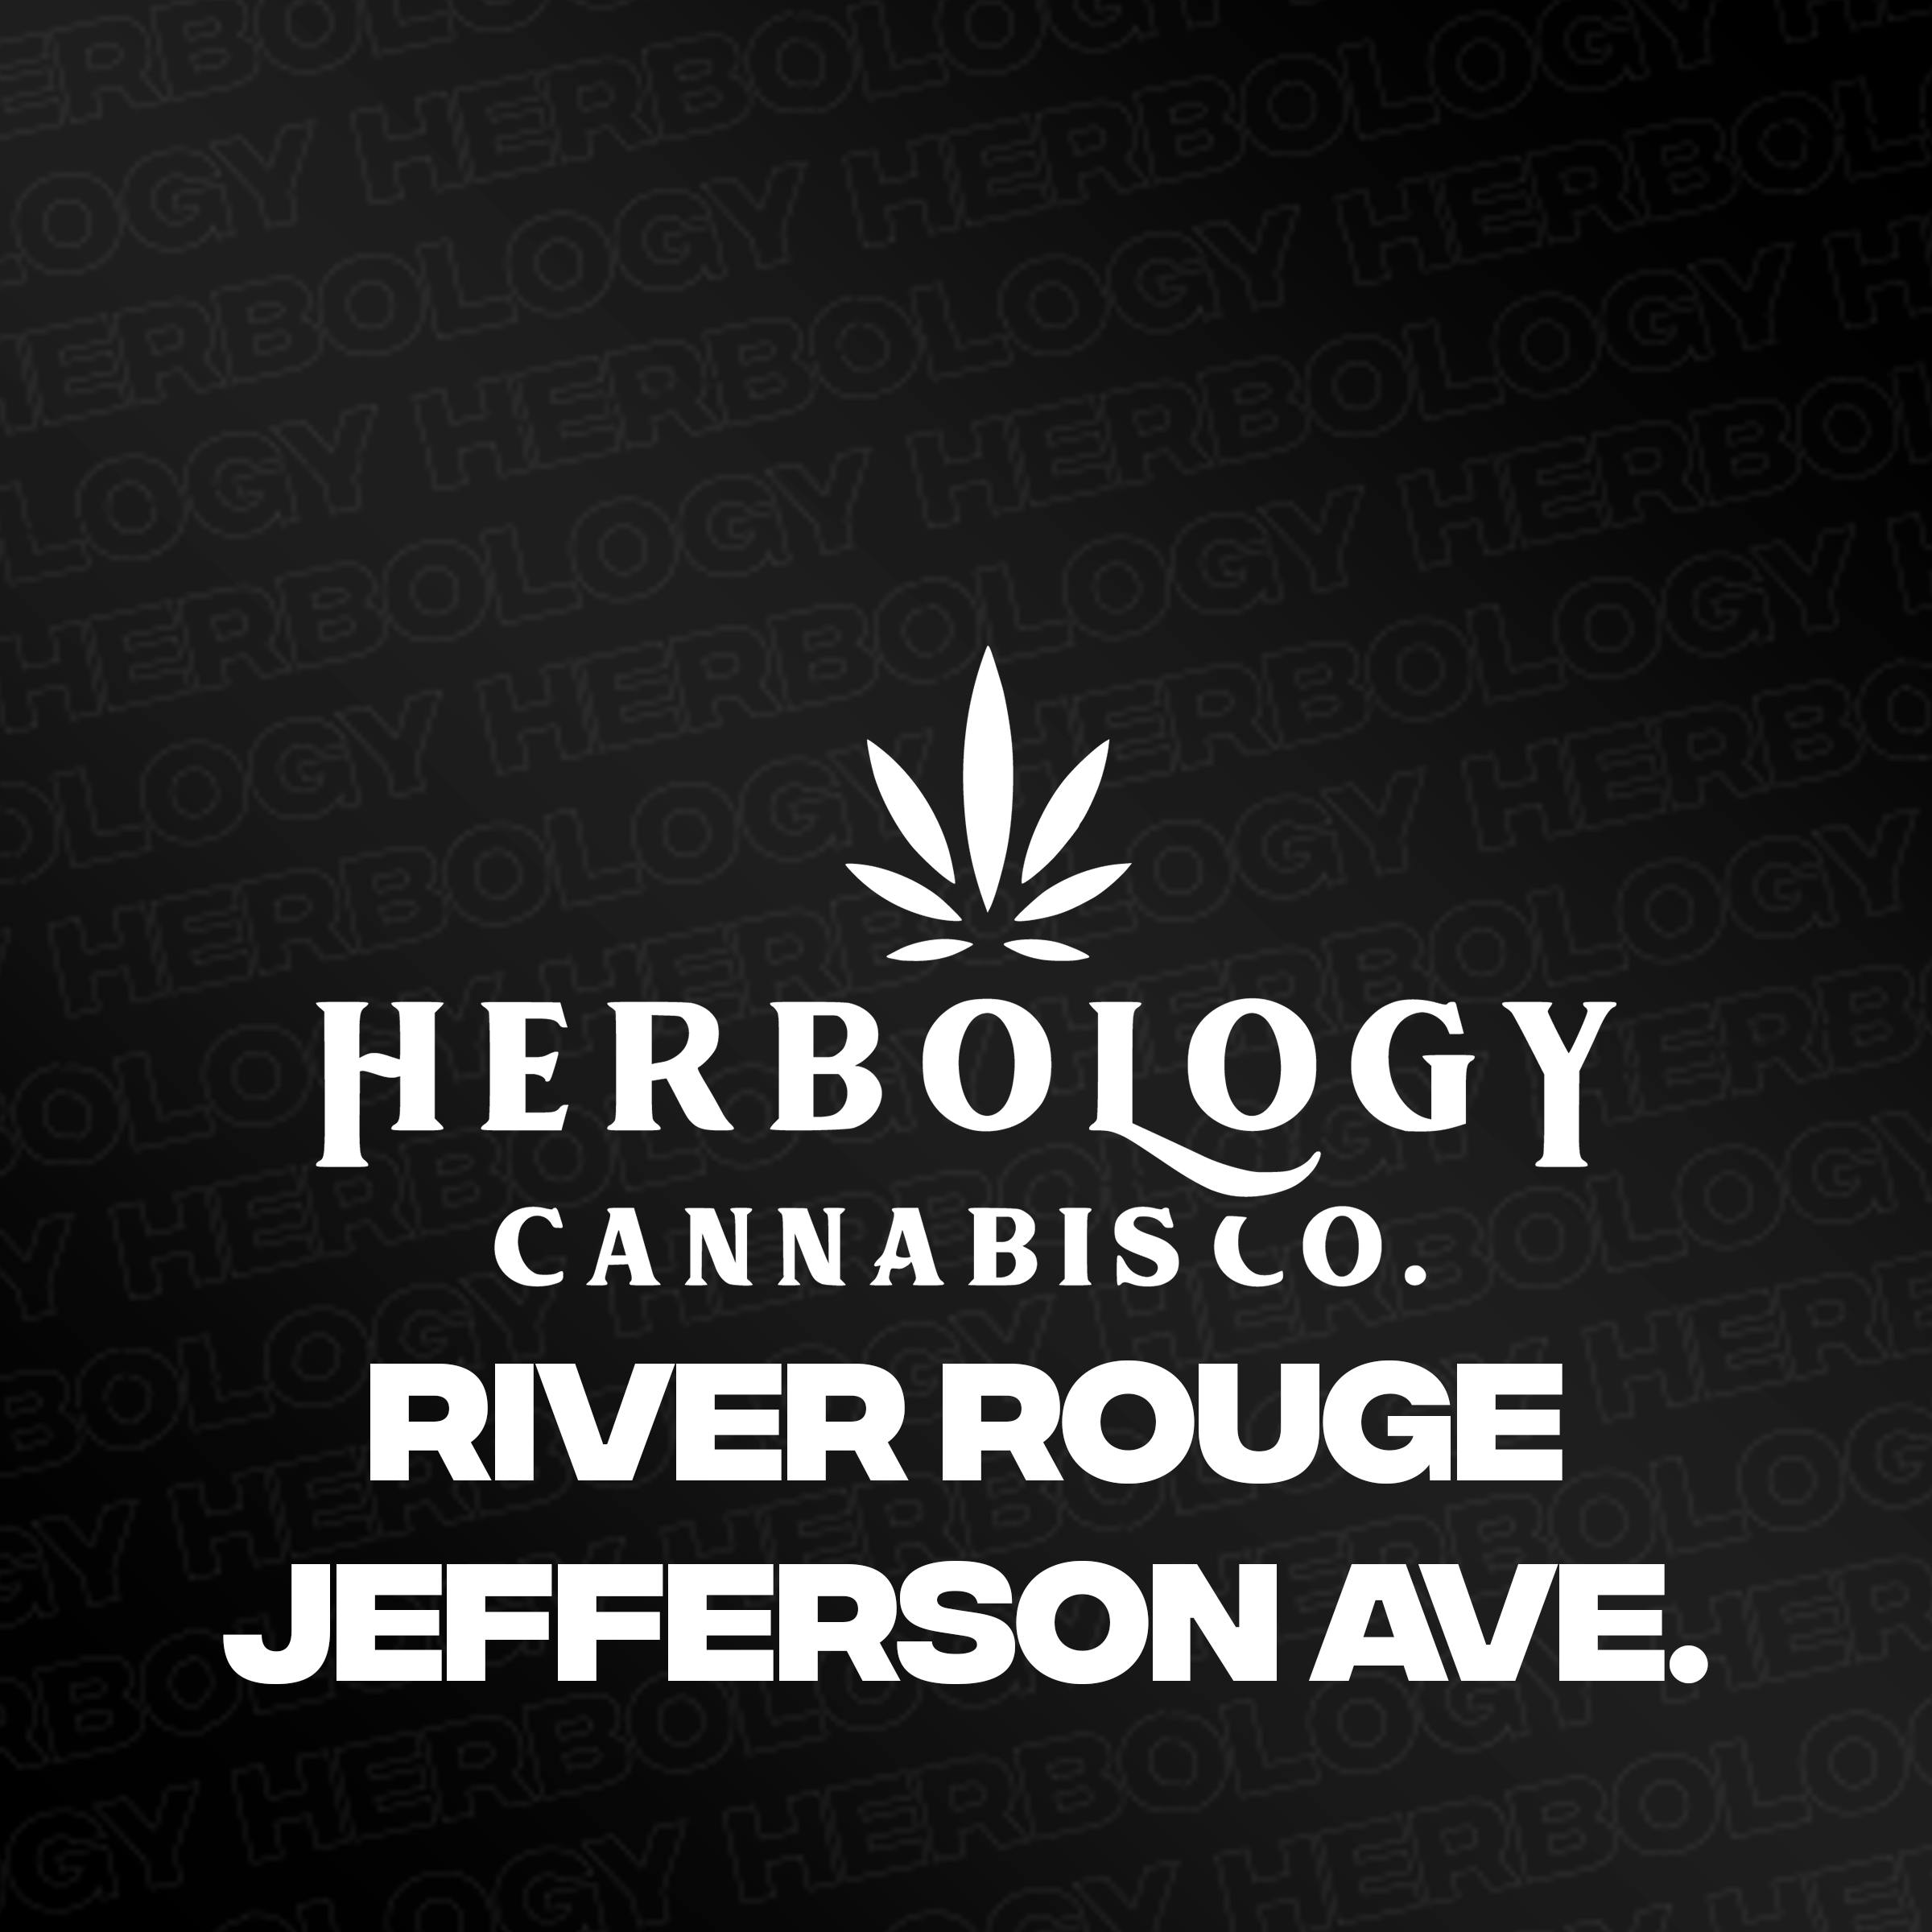 Herbology Cannabis Co. River Rouge - Jefferson Ave. - Recreational Cannabis Dispensary logo